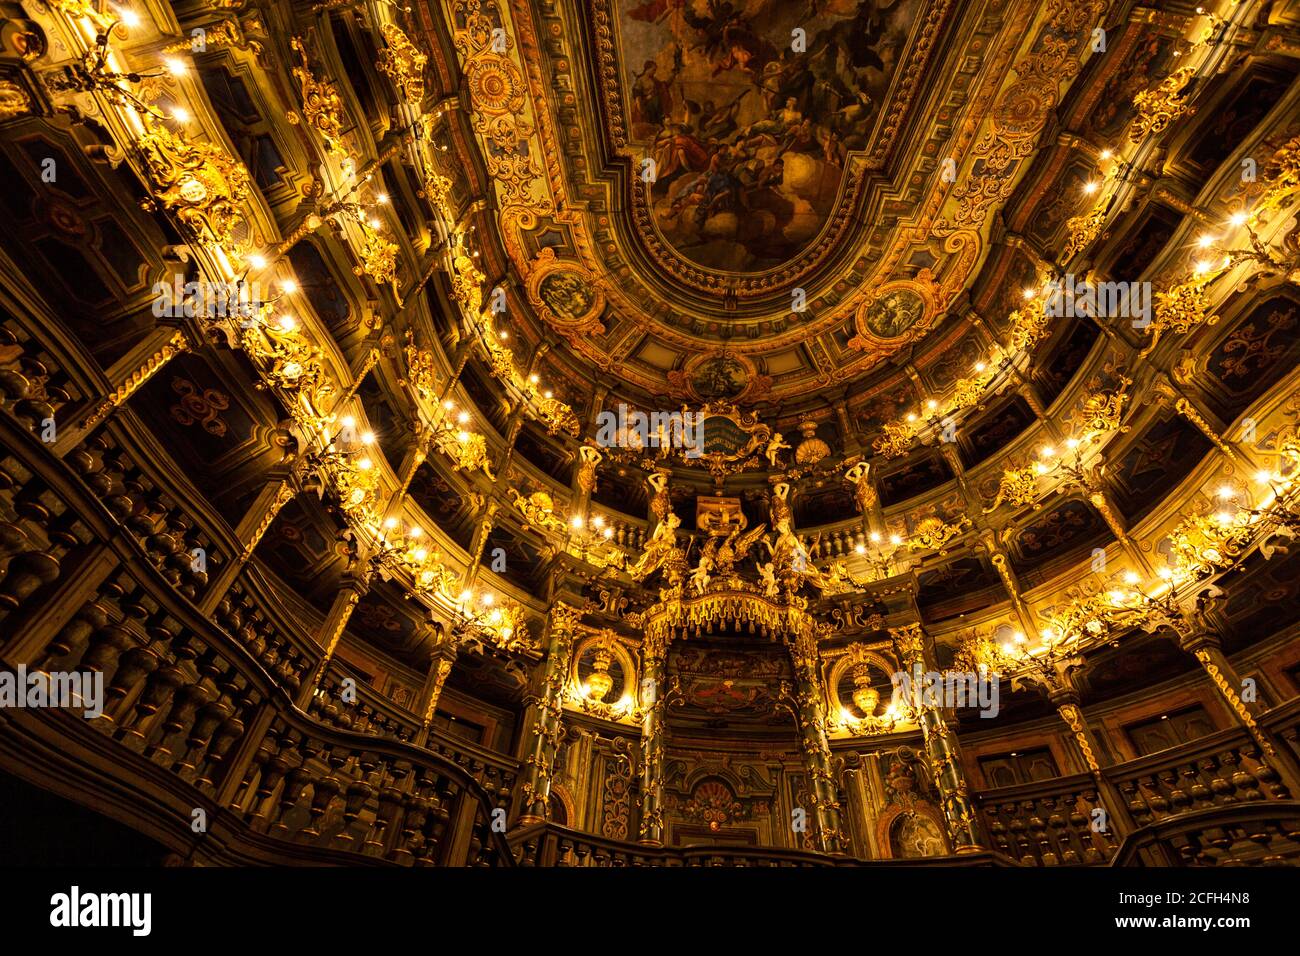 margravial opera house Bayreuth Germany Baroque style Unesco World Heritage listed ornate mid eighteenth century construction Stock Photo